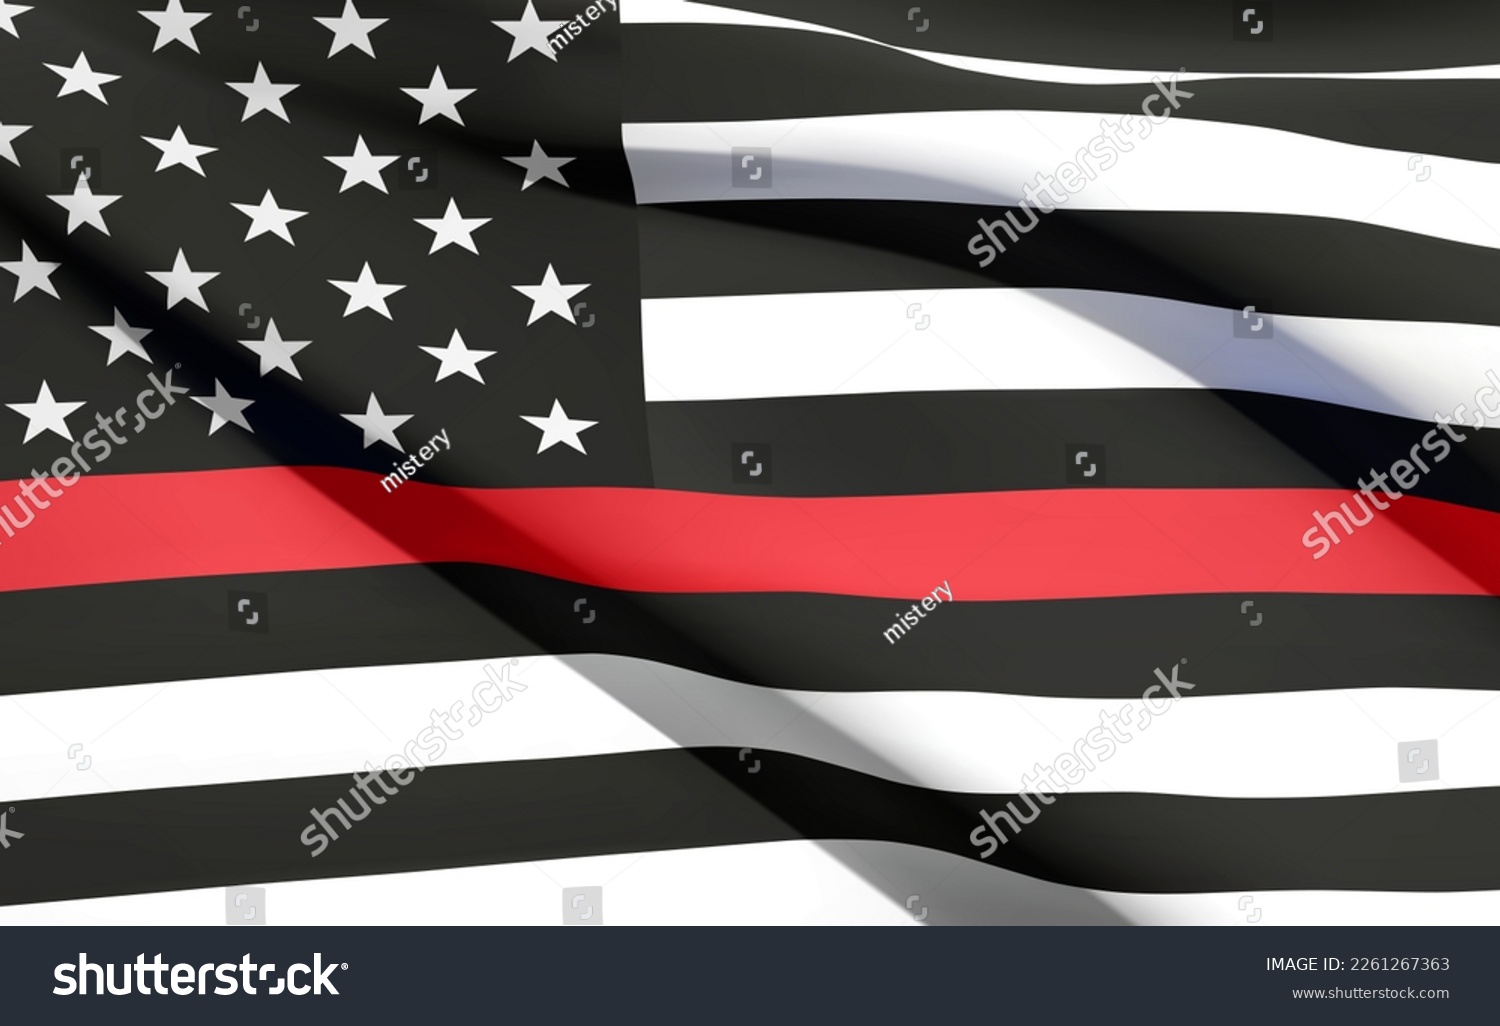 SVG of Thin Red Line. Firefighter Flag. Remembering, memories on fallen fire fighters officers on duty. EPS10 vector svg